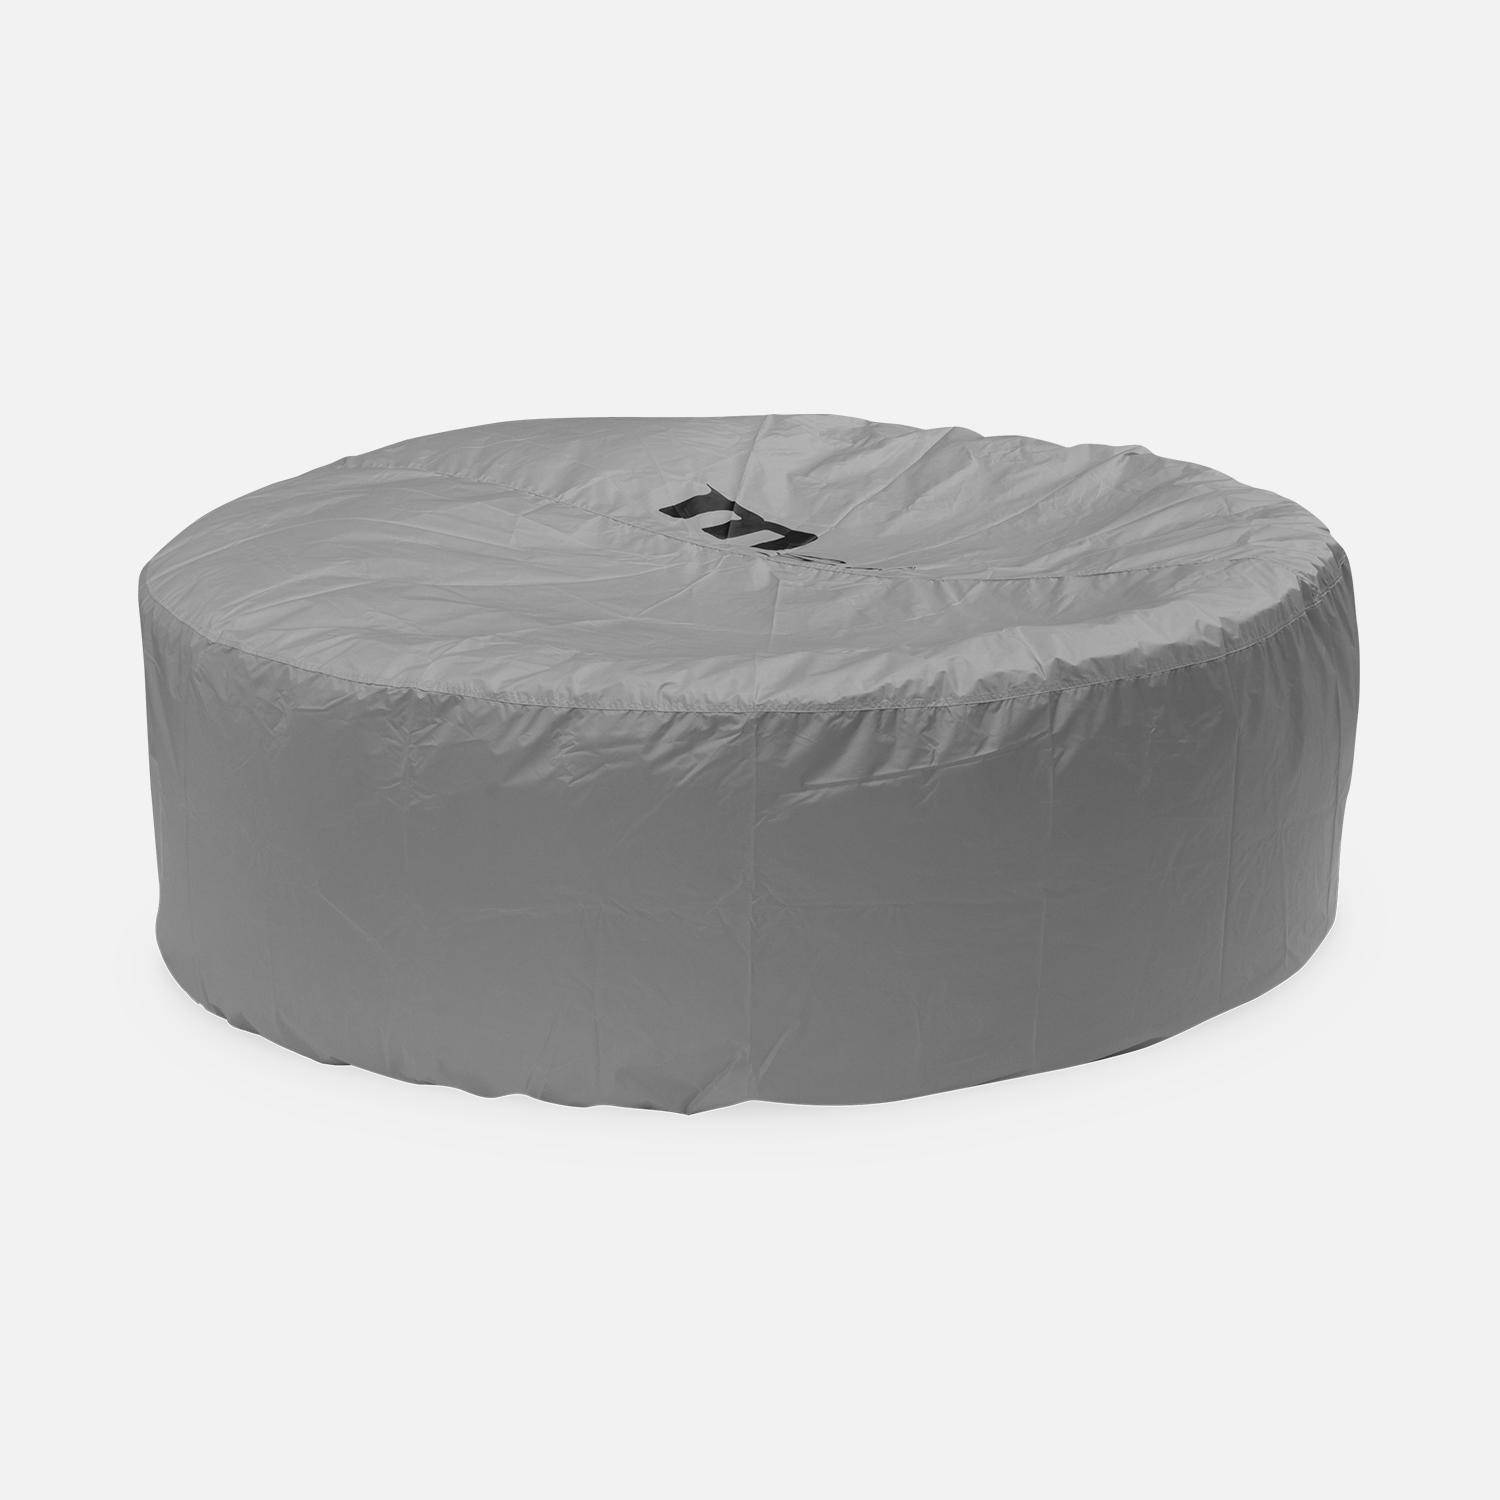 Protective cover for 6-person round MSPA inflatable hot tub – Ø 215x70cm Photo1